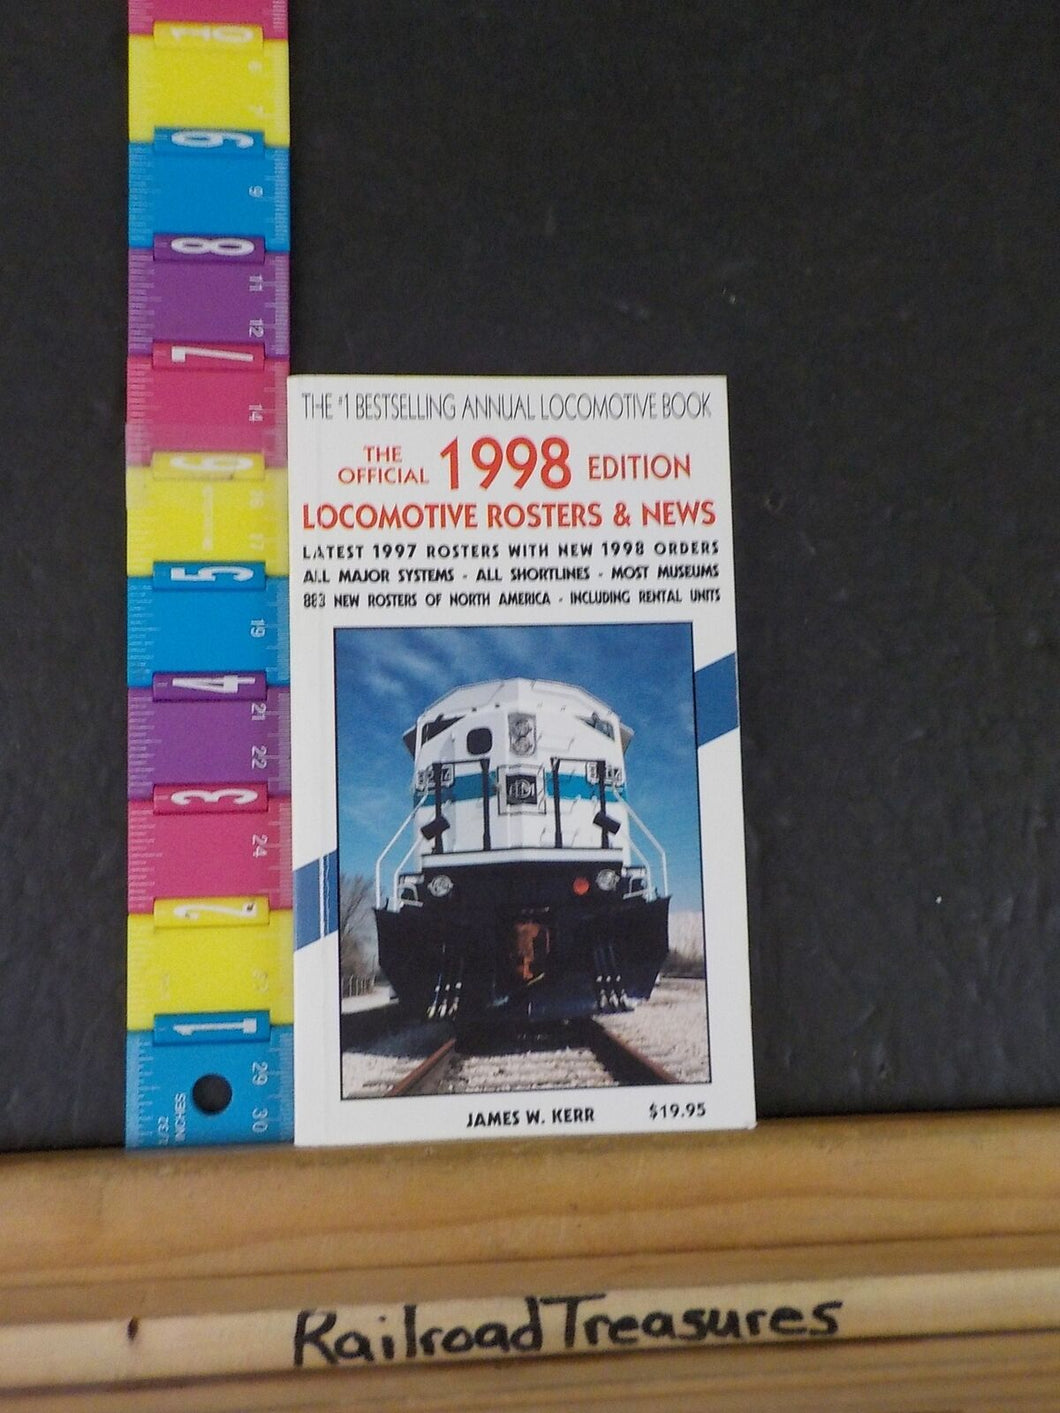 Locomotive Rosters & News, The Official 1998 Edition Soft Cover by James Kerr